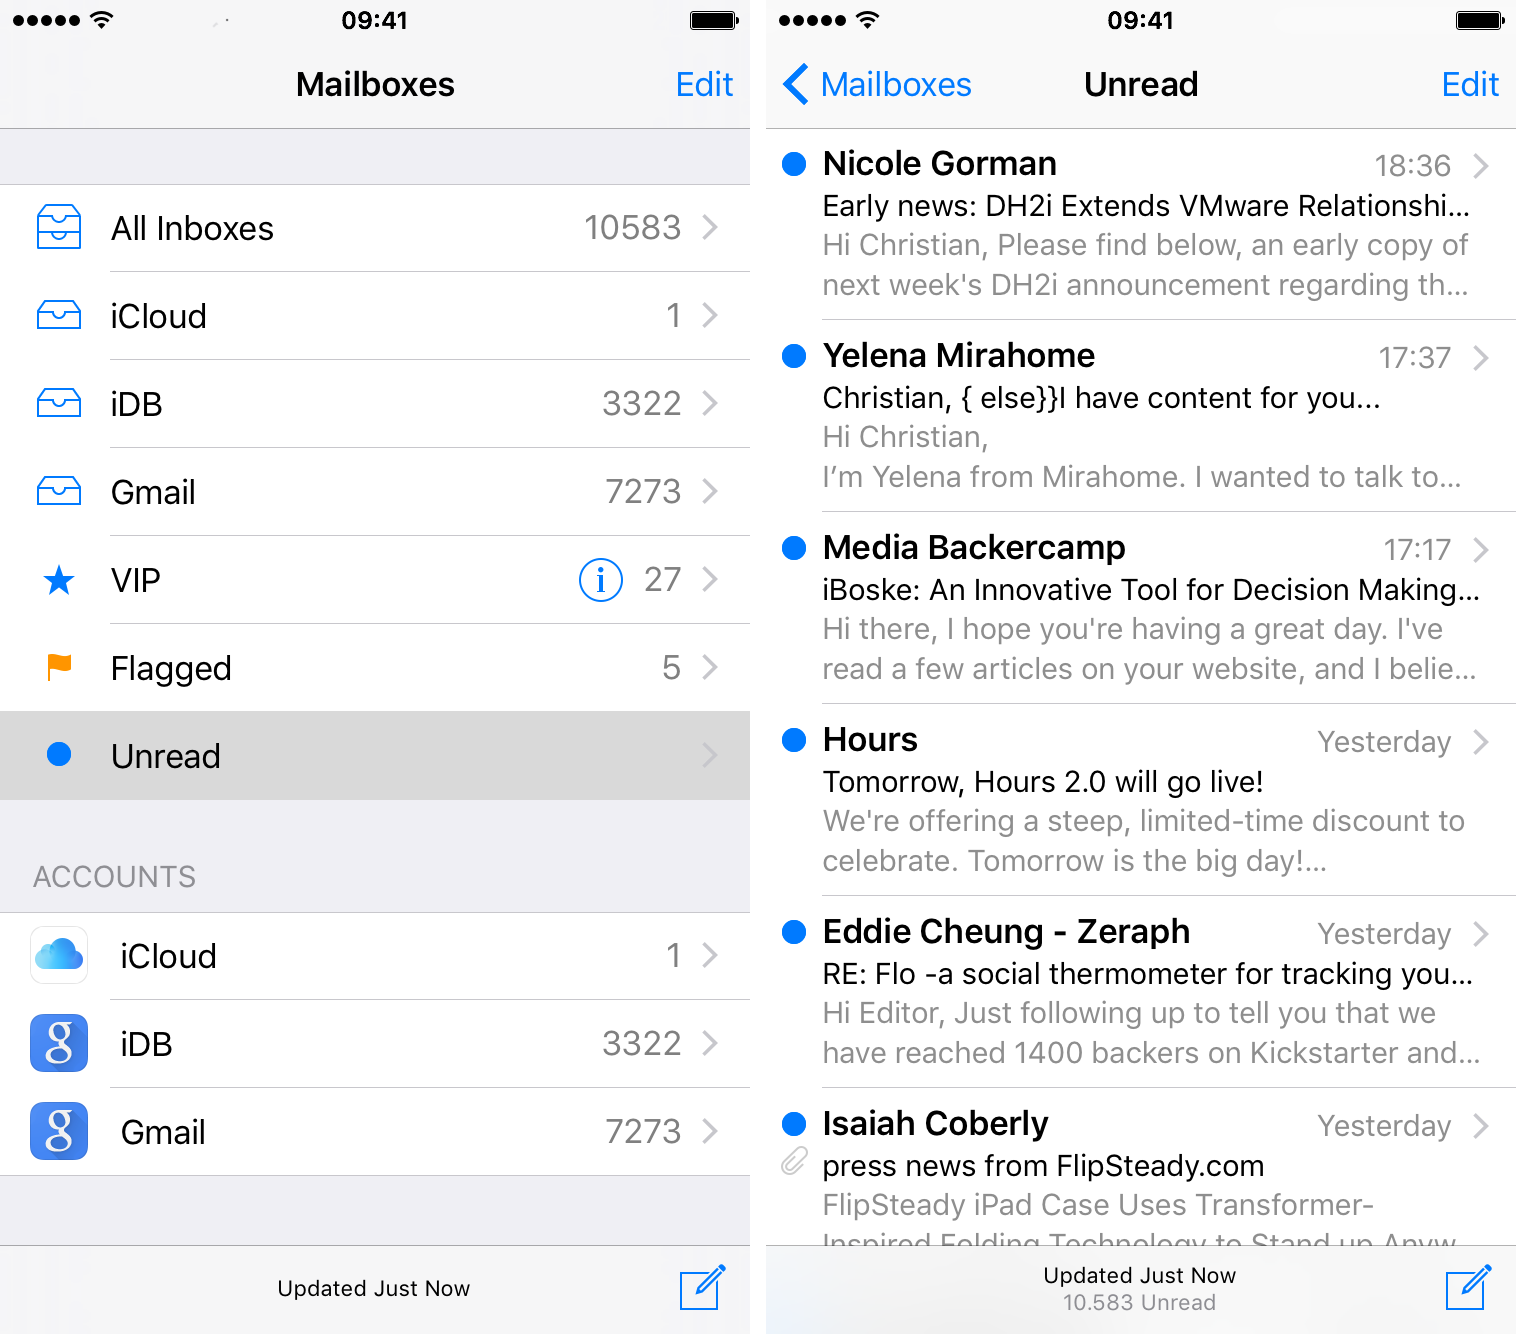 How to clear an incorrect unread email count badge on the Mail app